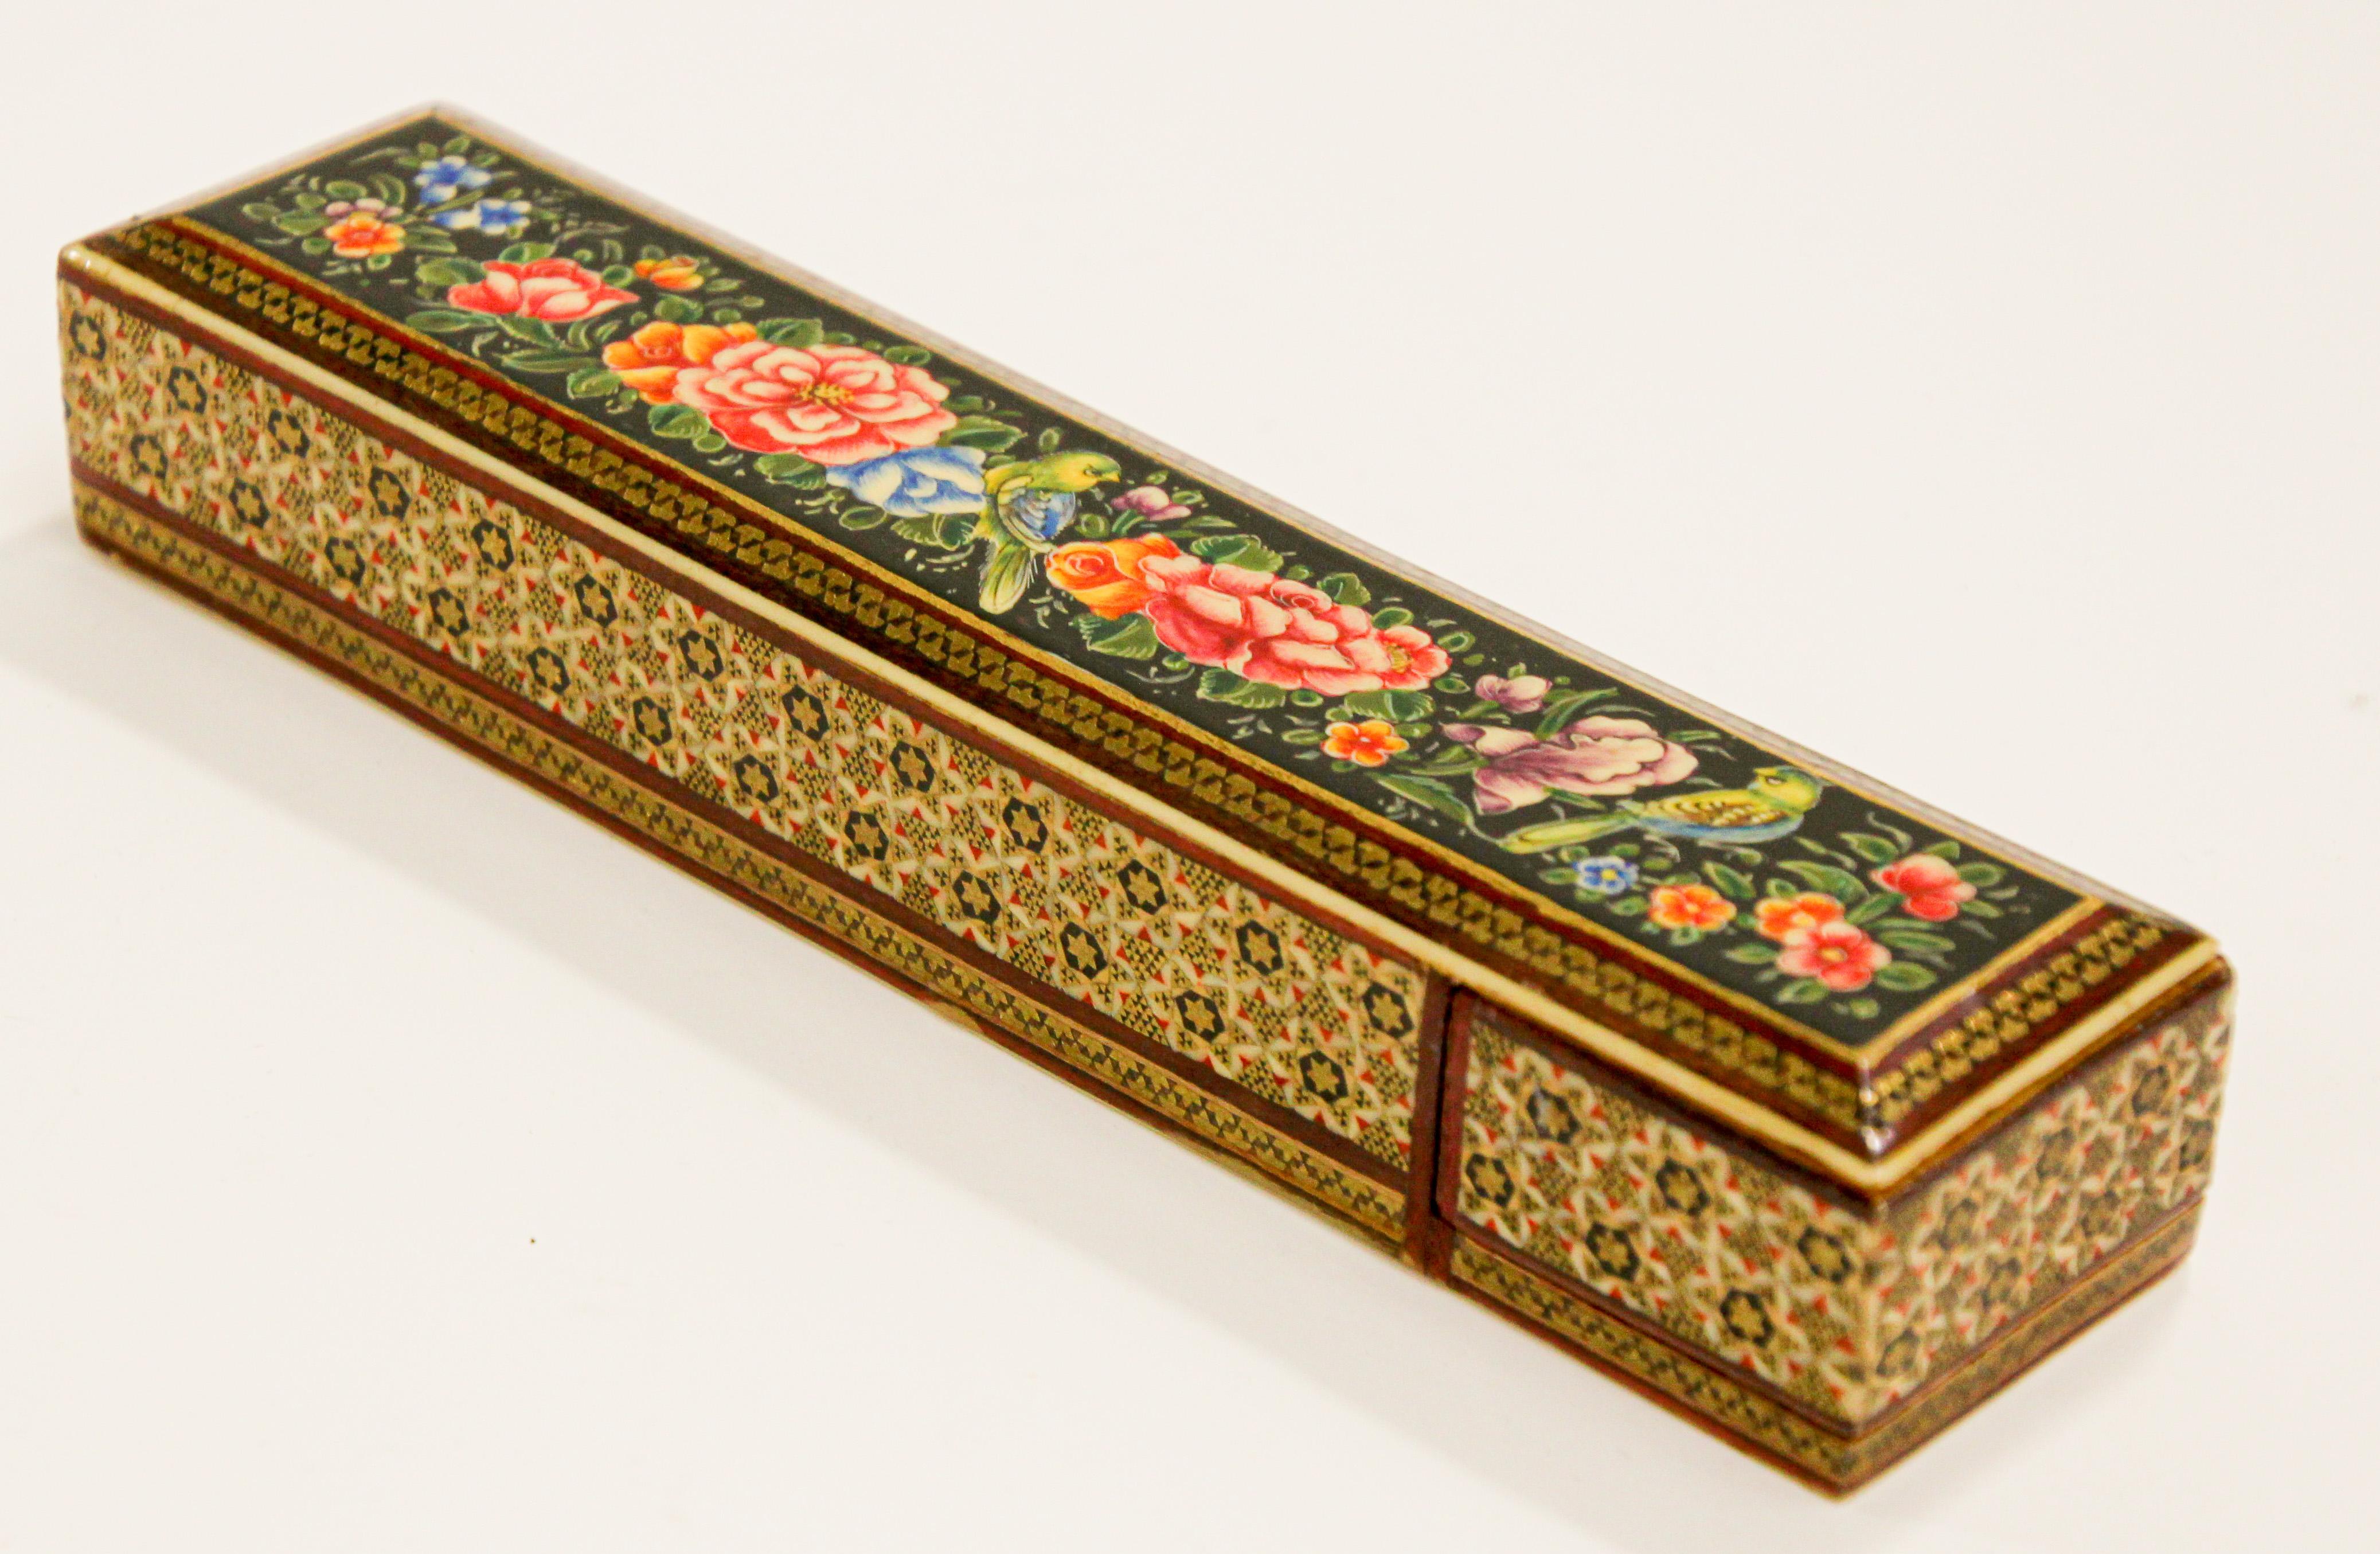 20th Century Persian Lacquer Pen Box Hand Painted with Floral Design